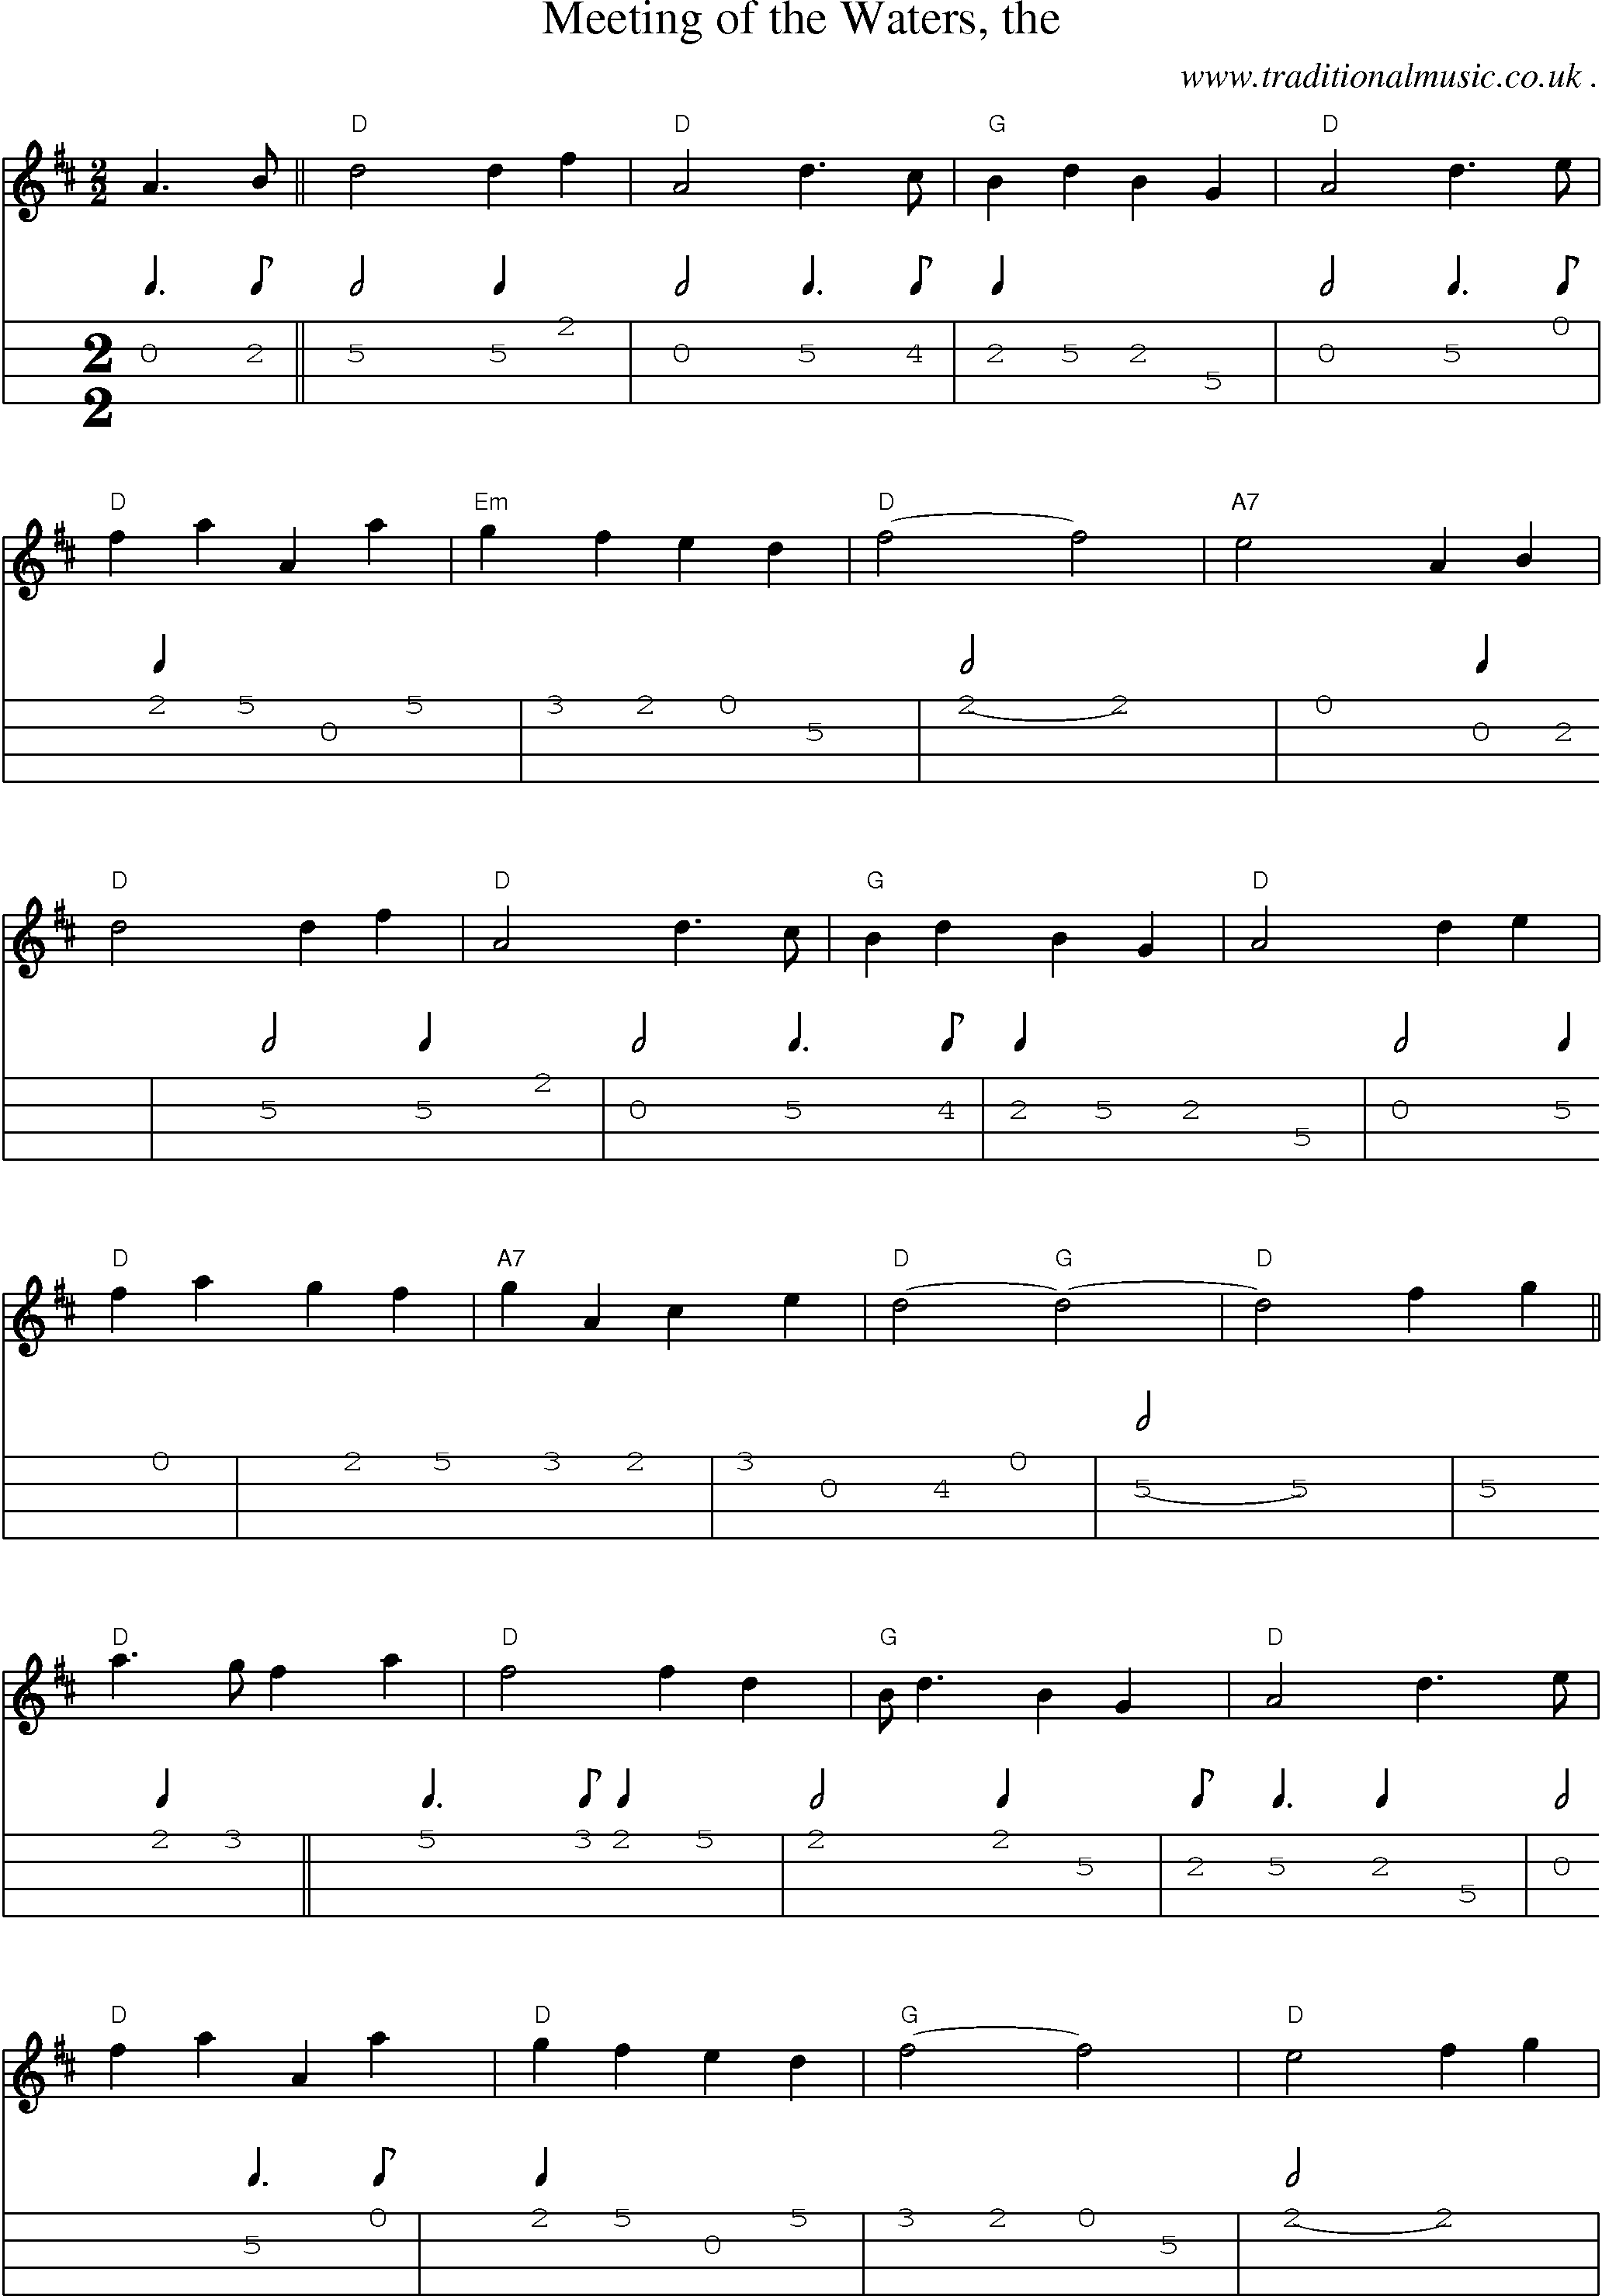 Sheet-music  score, Chords and Mandolin Tabs for Meeting Of The Waters The